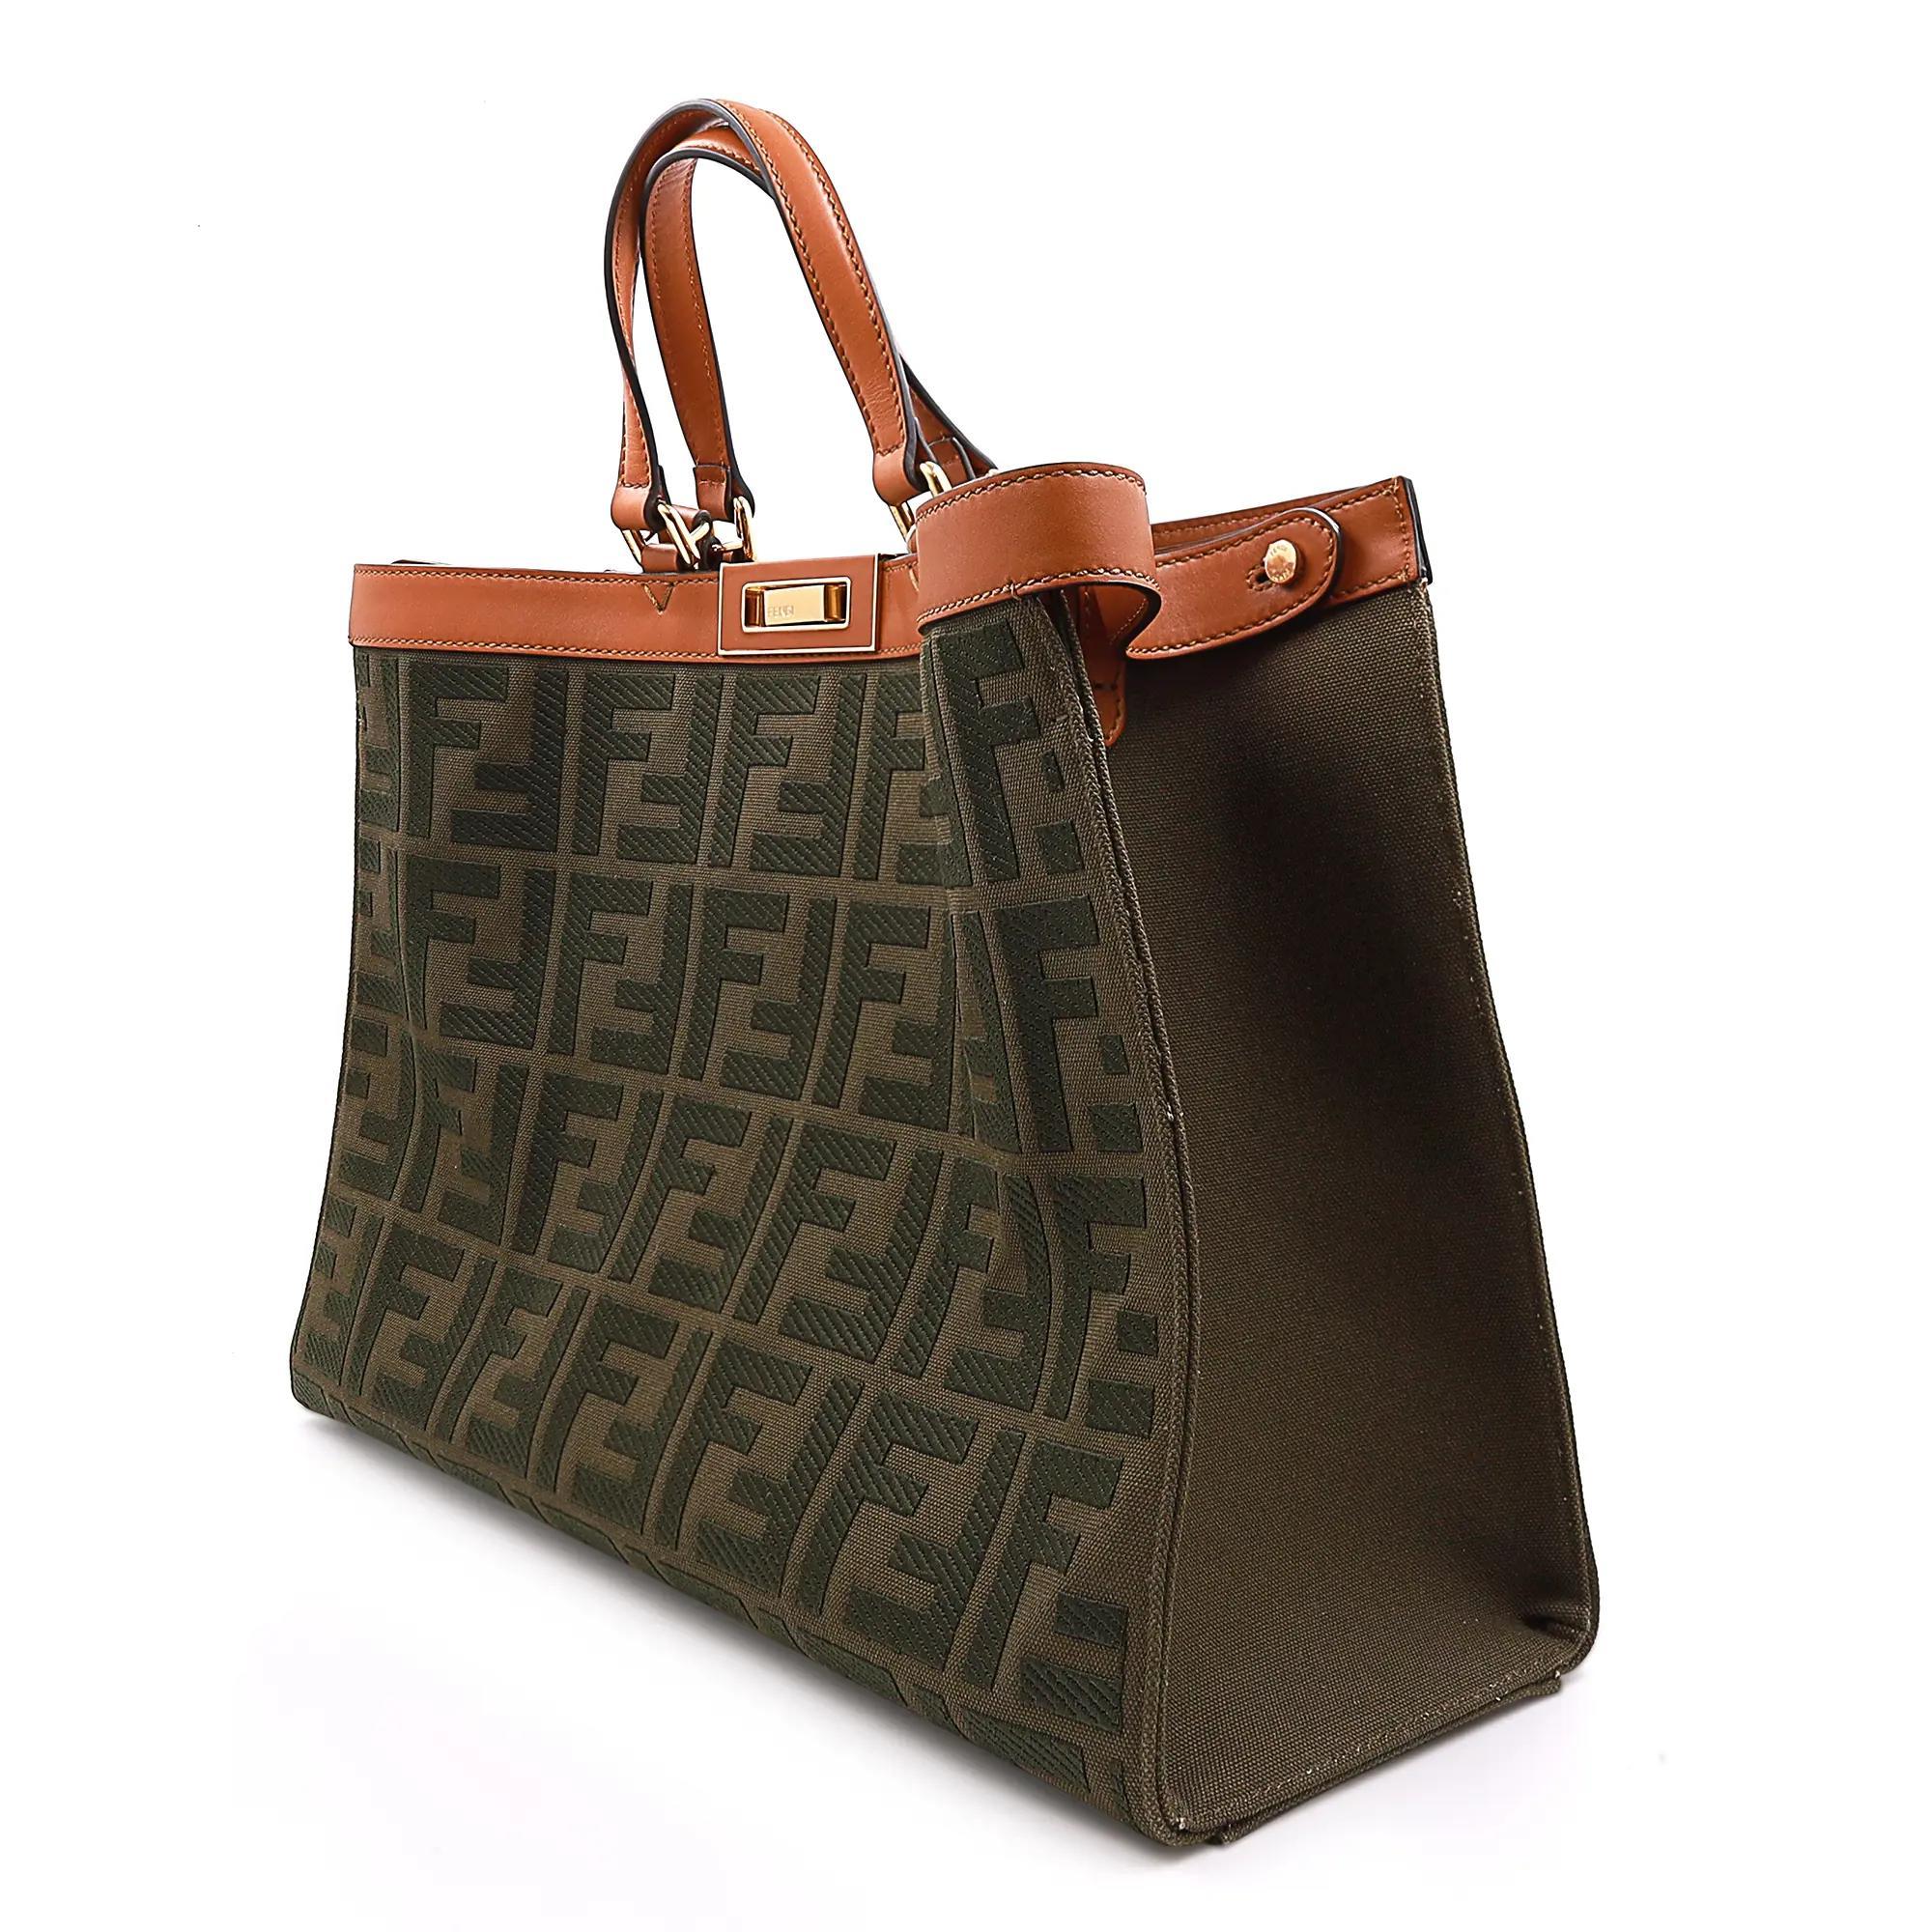 Fendi Peekaboo X-Tote Canvas Medium Green Handbag. Featuring embossed and embroidered Fendi motifs on green color canvas with brown trimmed leather. One interior pocket with press-stud. Gold tone hardware. Two small handles with two long handles for